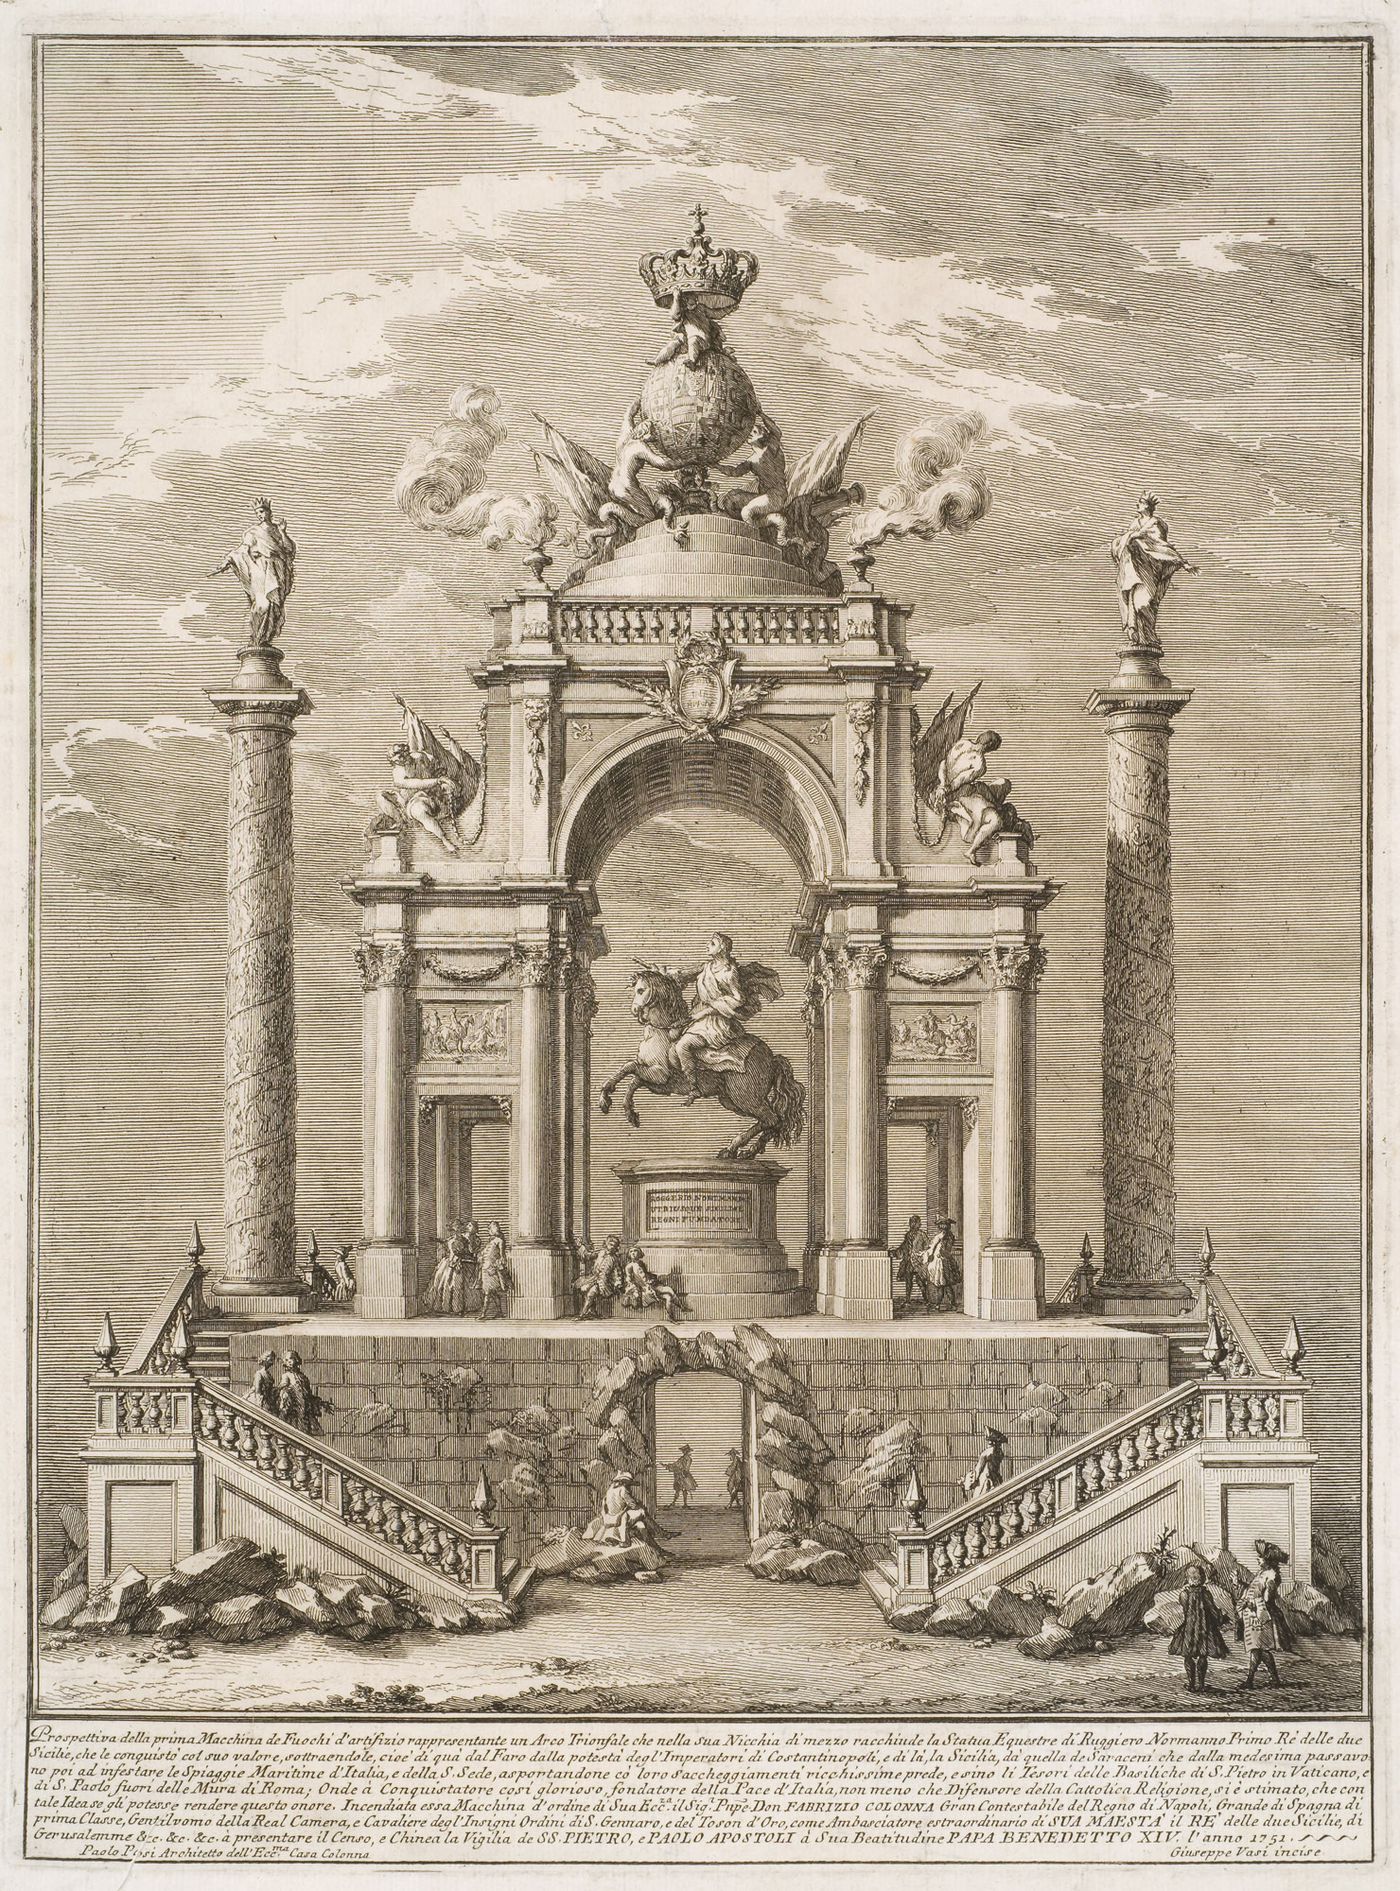 Etching of Posi's design for the "prima macchina" of 1751